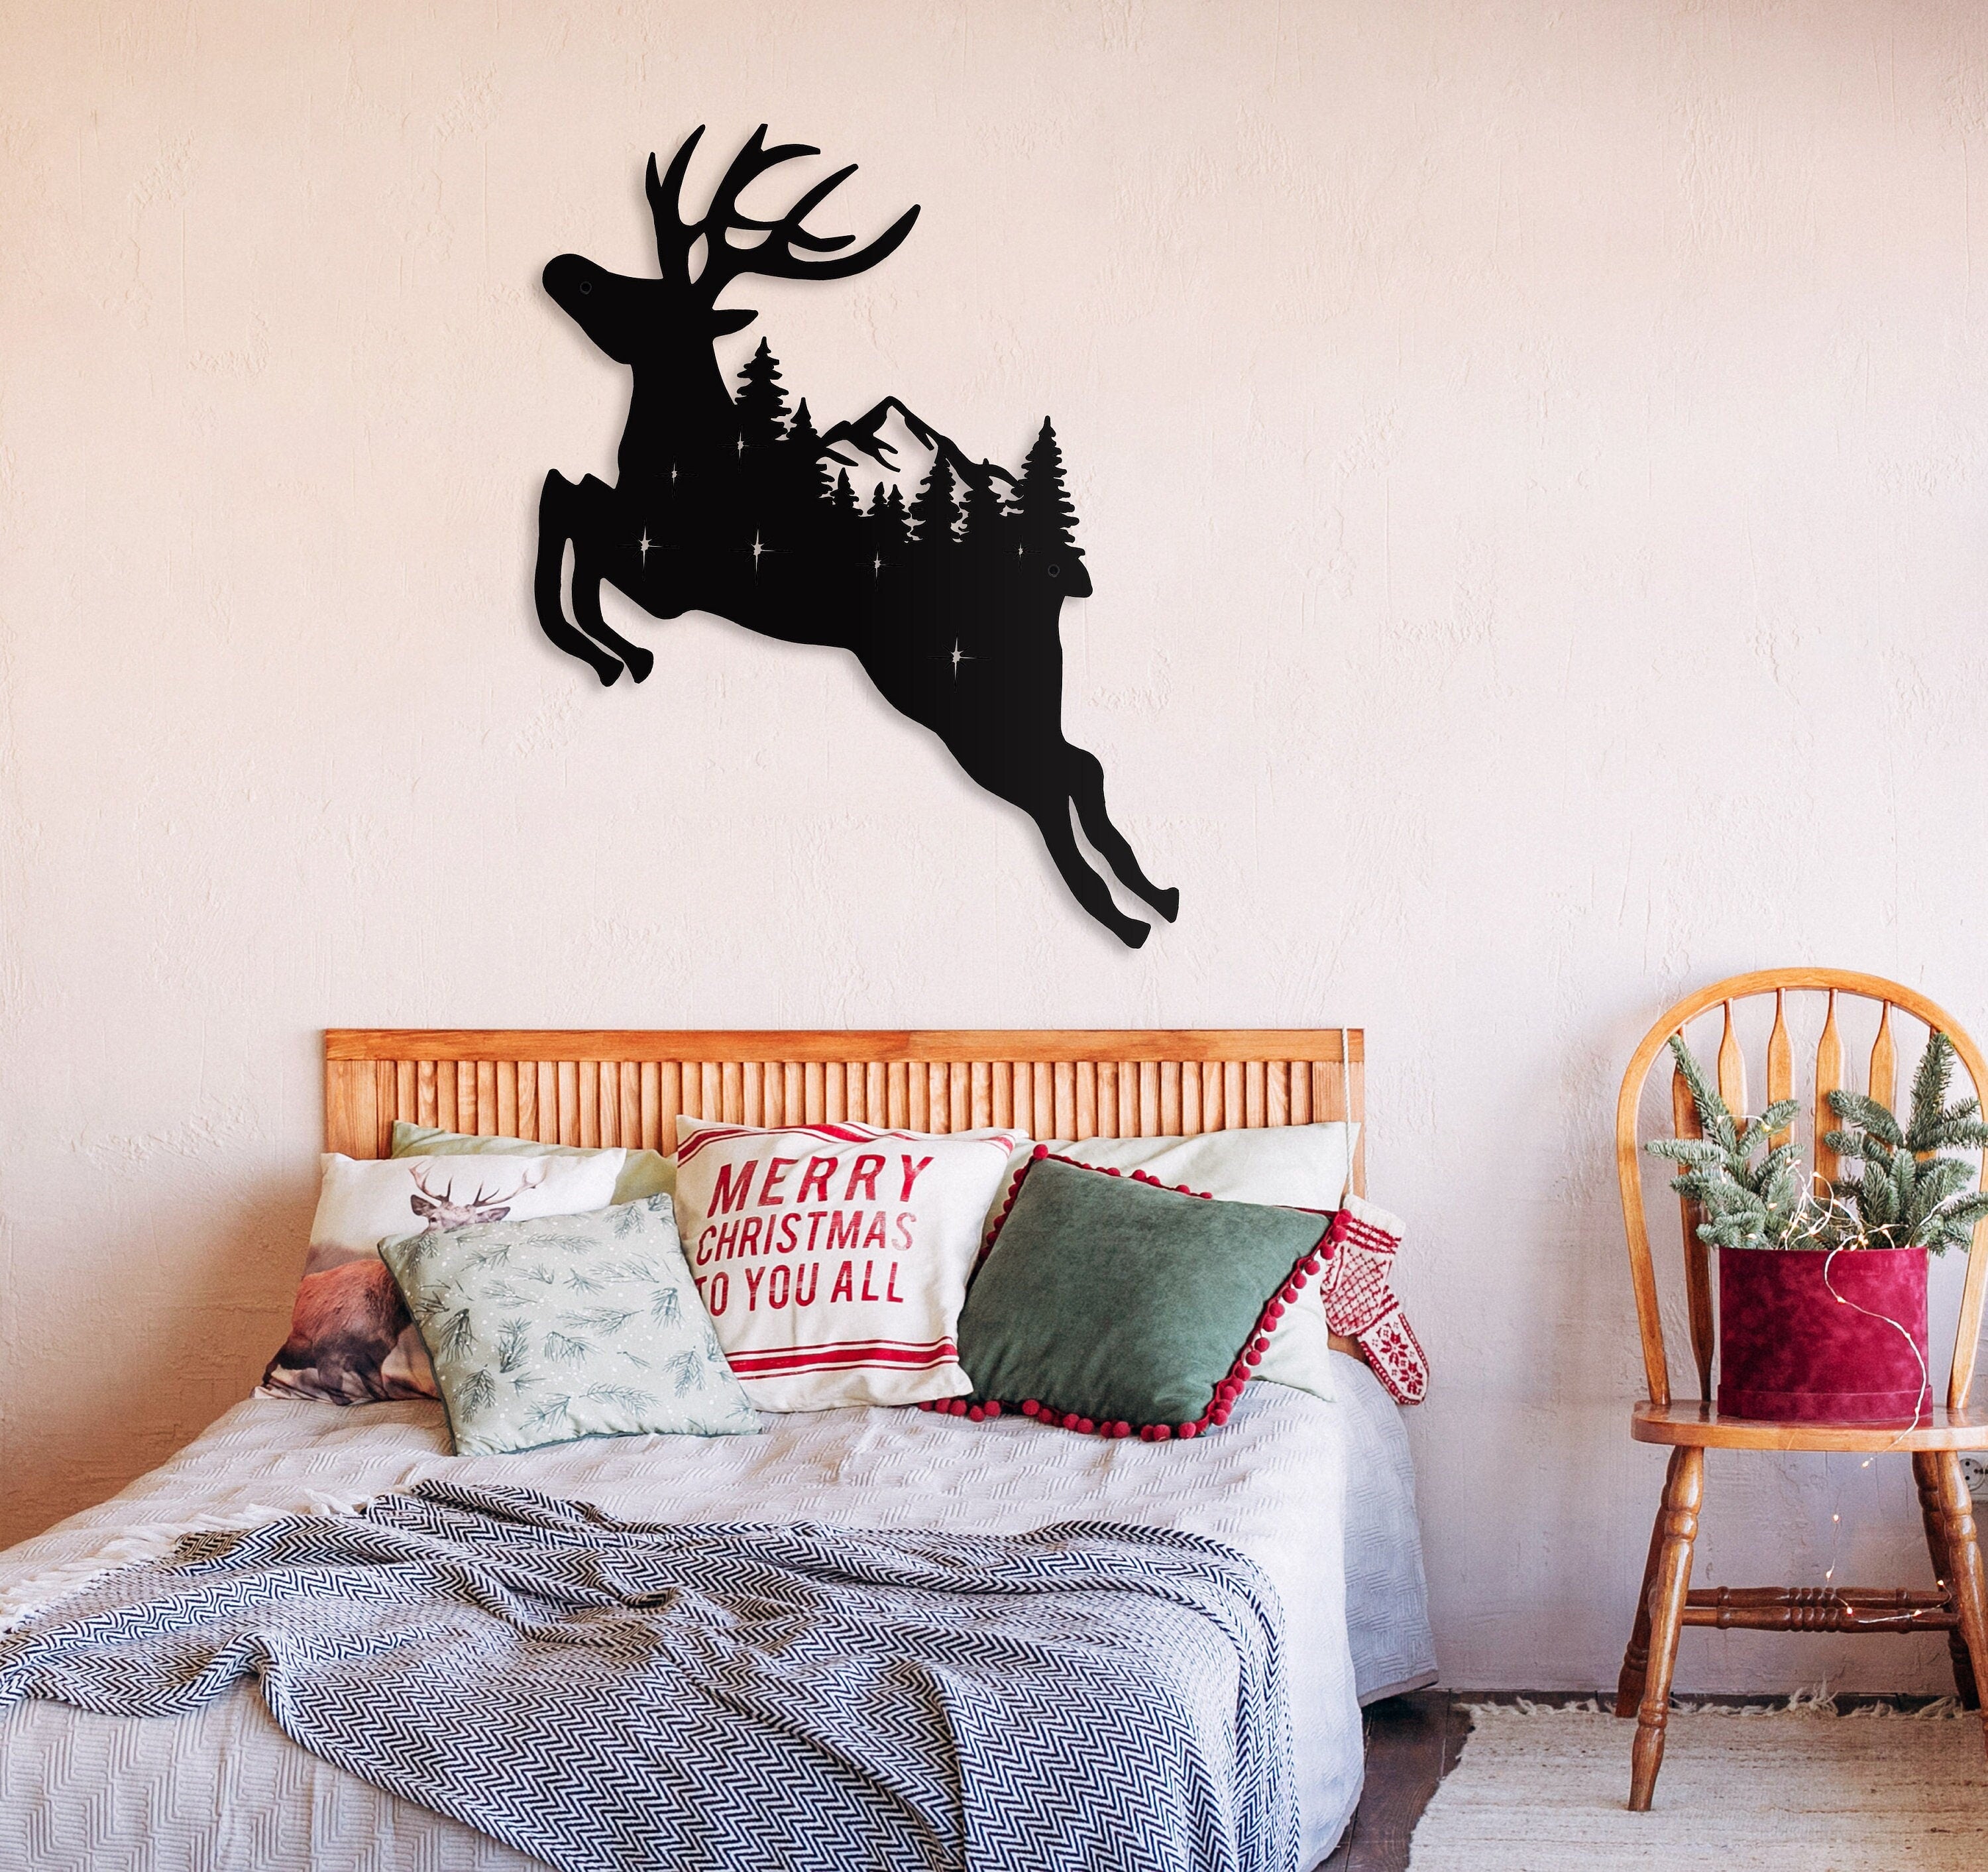 Deer Decor, Christmas Decor, Unique Wall Decor, Living Room Decoration, Housewarming Gift, Gift For Her, Girlfriend Gift, Metal Wall Decor